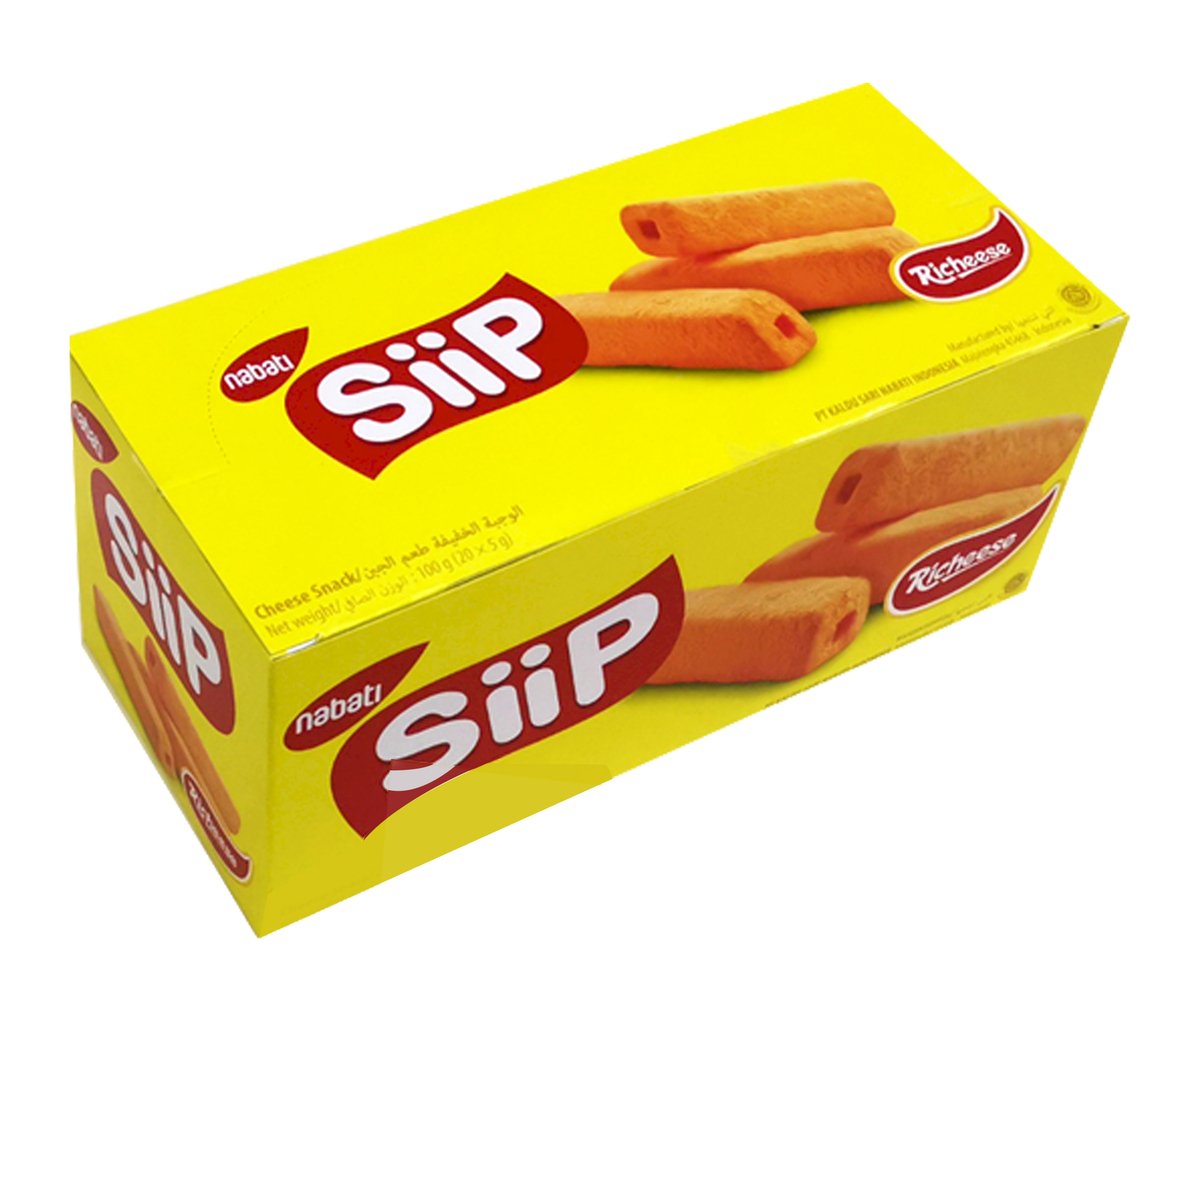 Richeese Siip Cheese Corn Snack 5 g